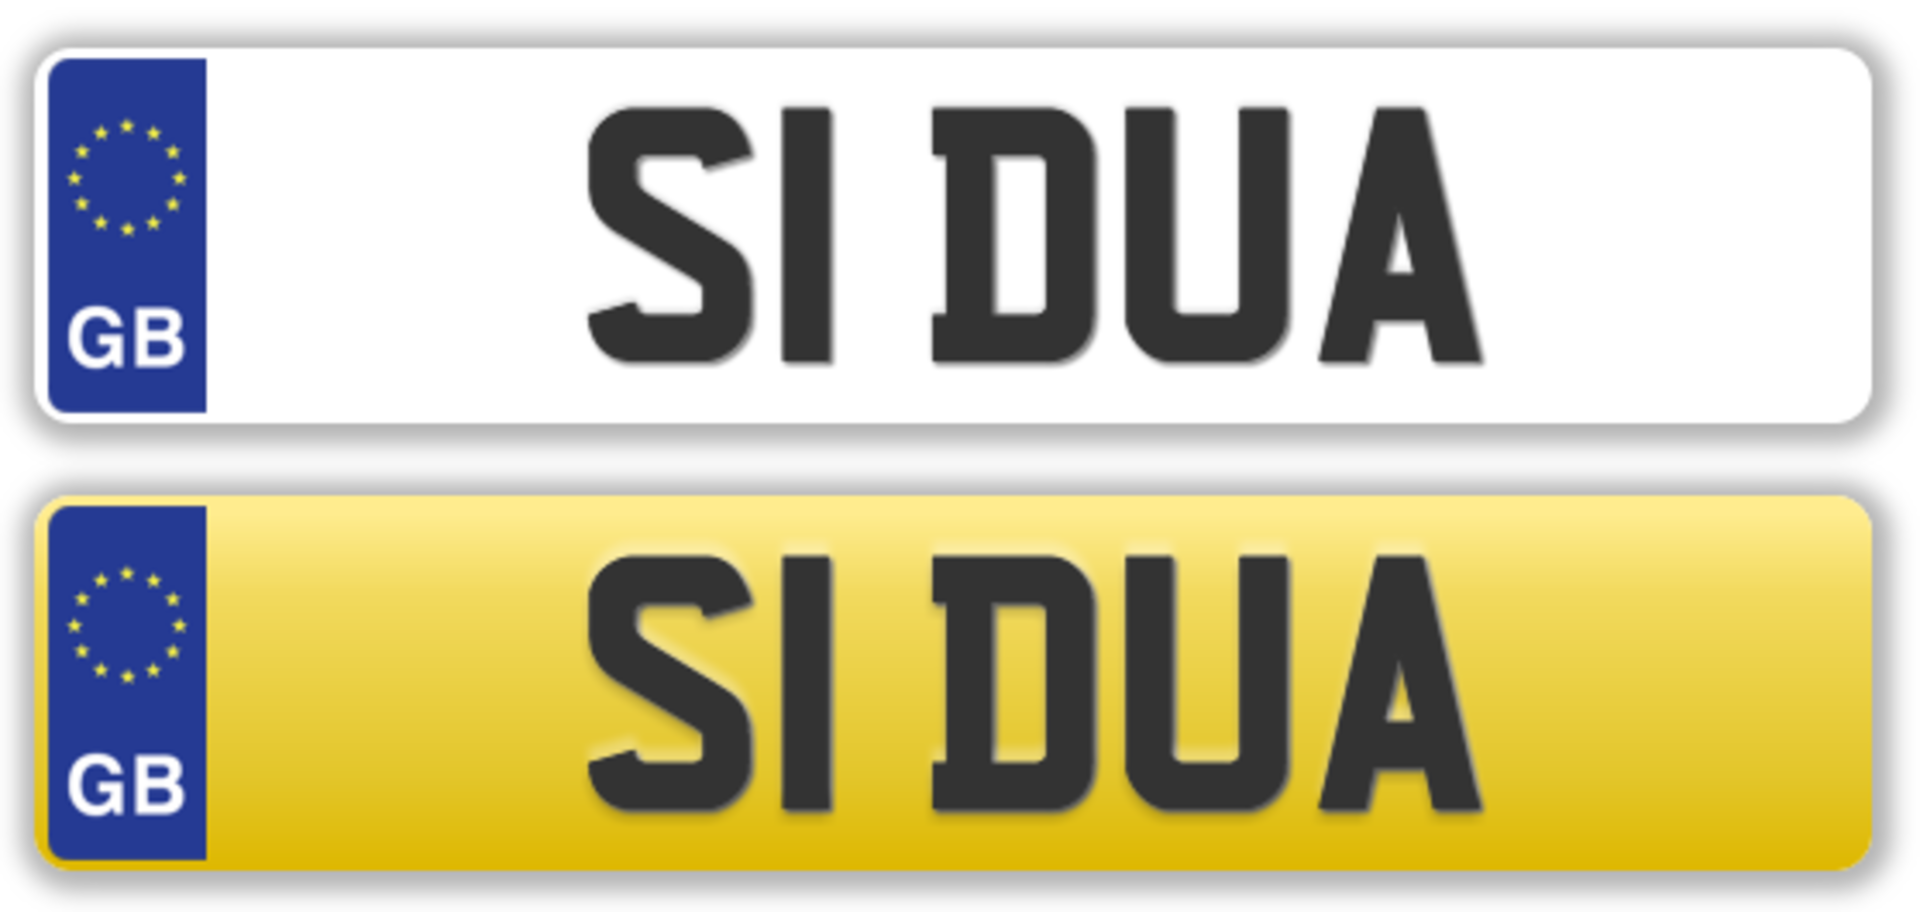 Cherished Plate - S1 DUA - No transfer fees. All registrations on retention and ready to transfer.